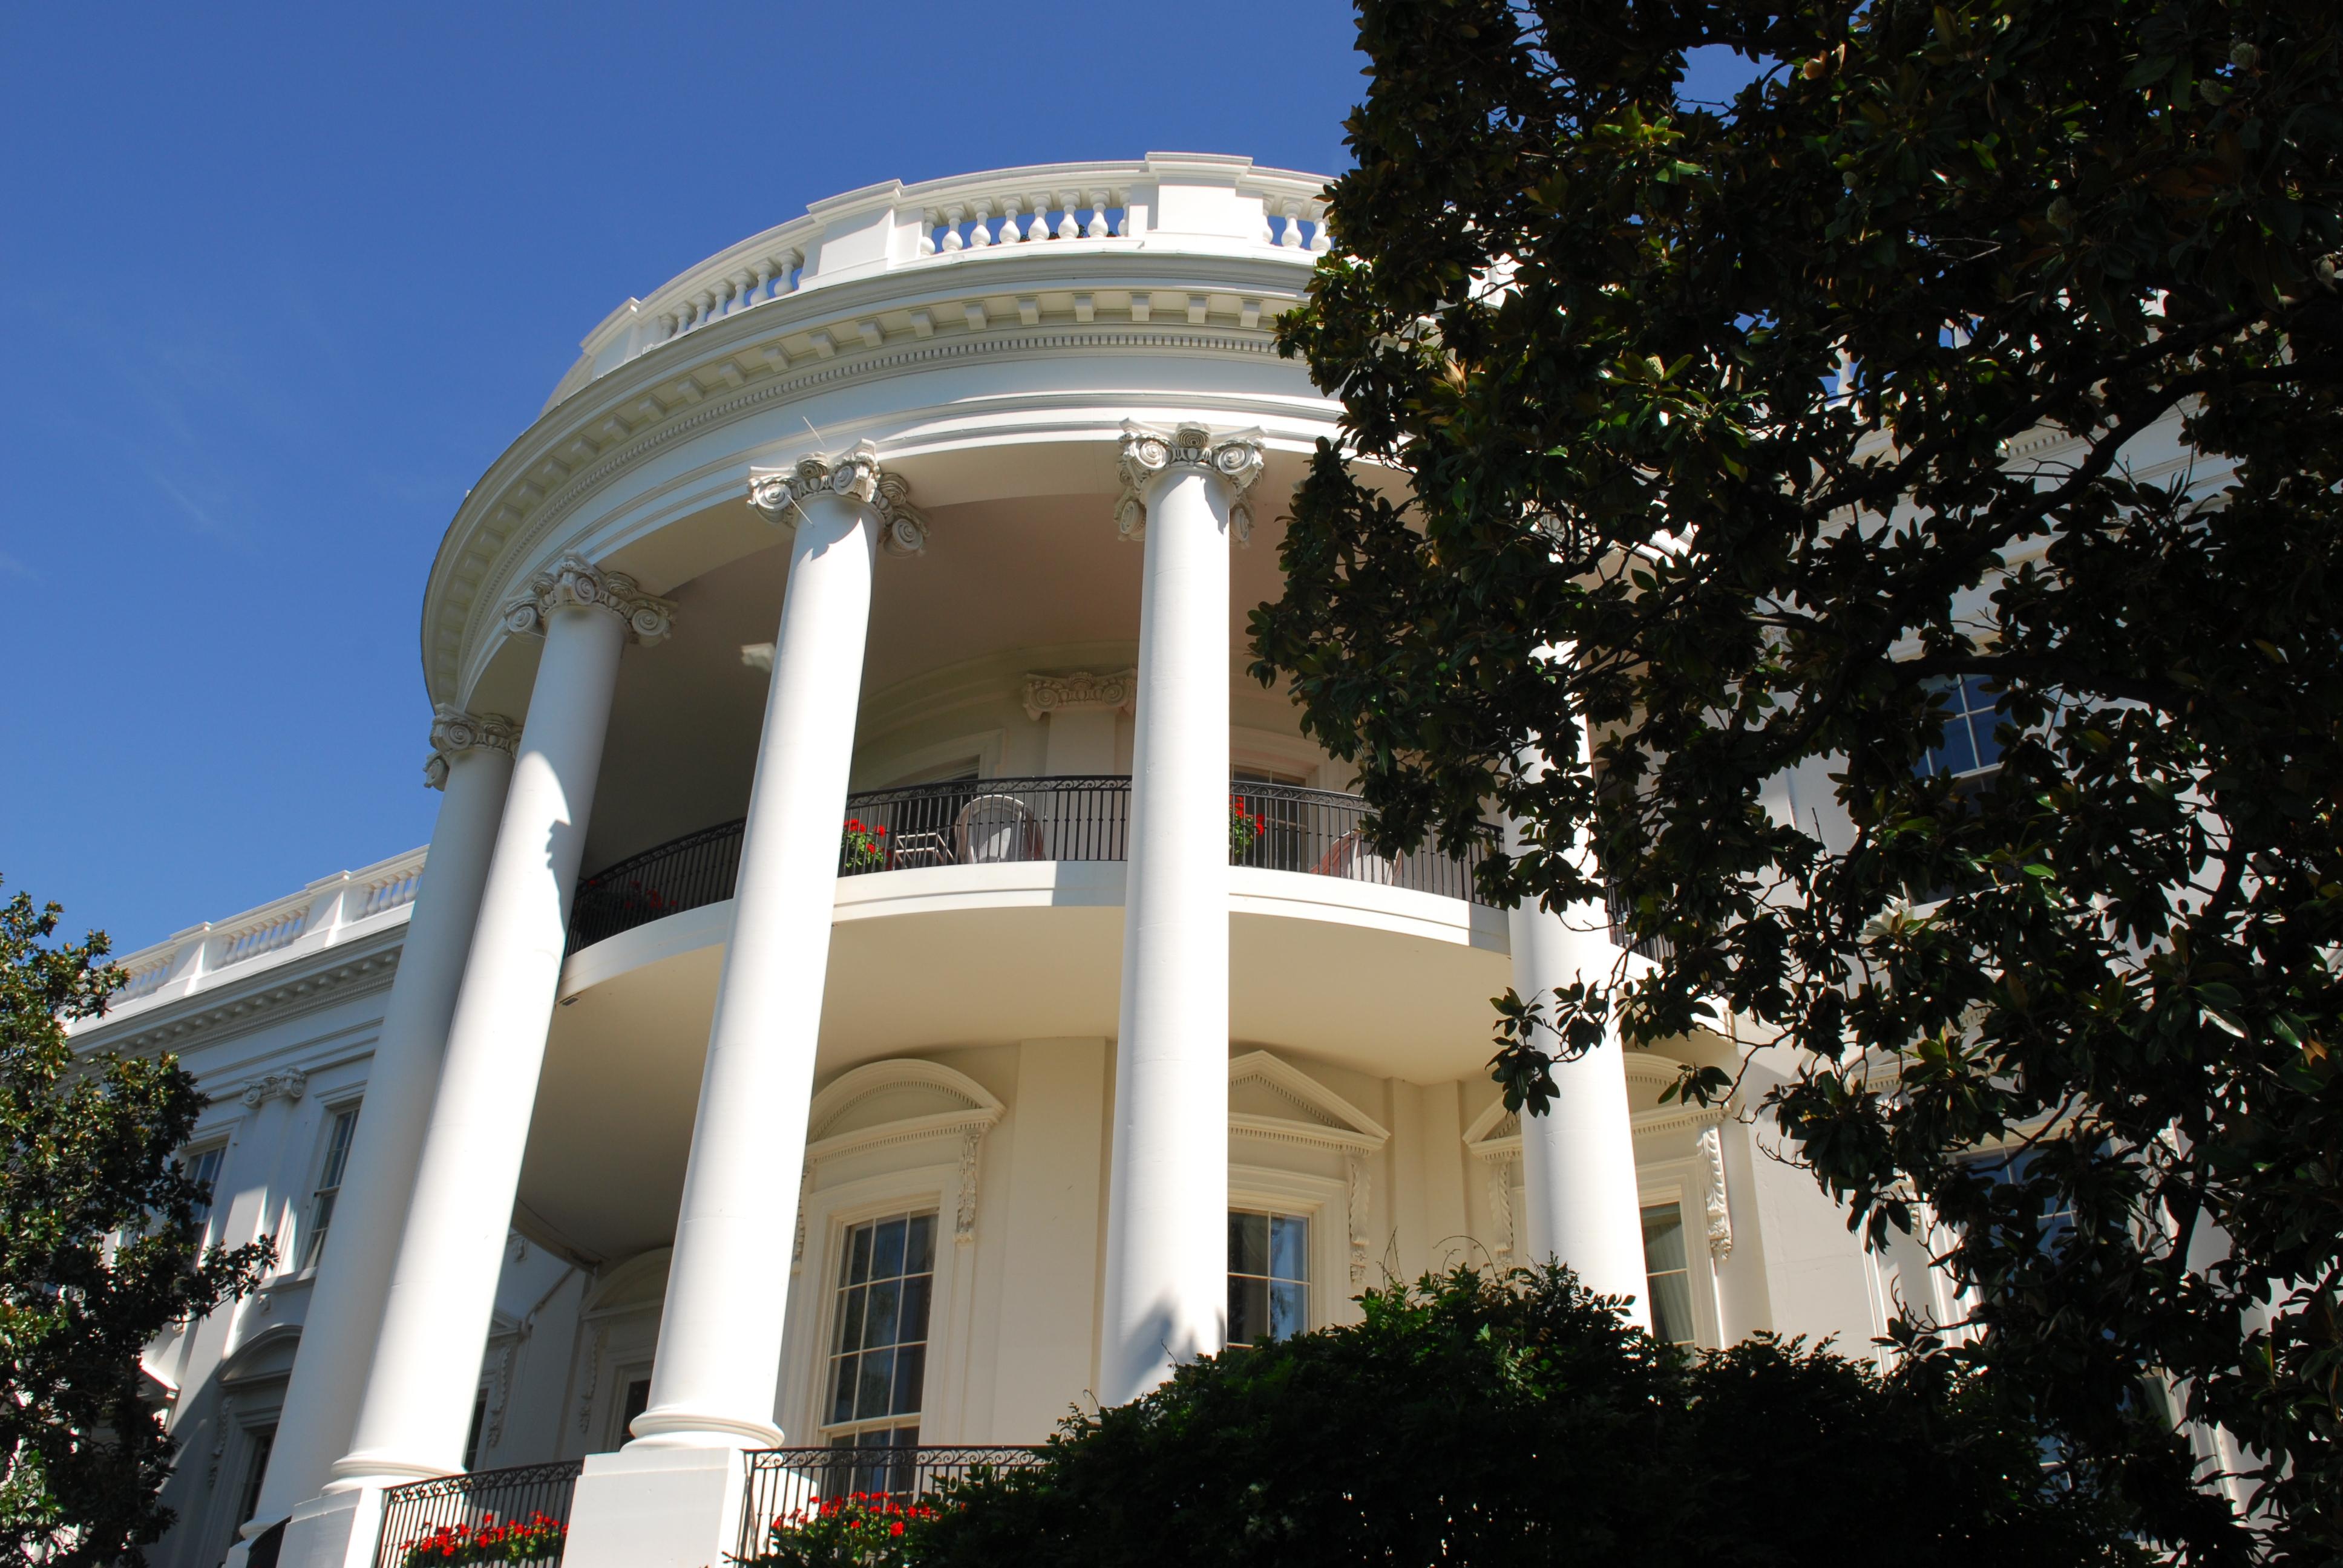 A close-up of the White House portico.